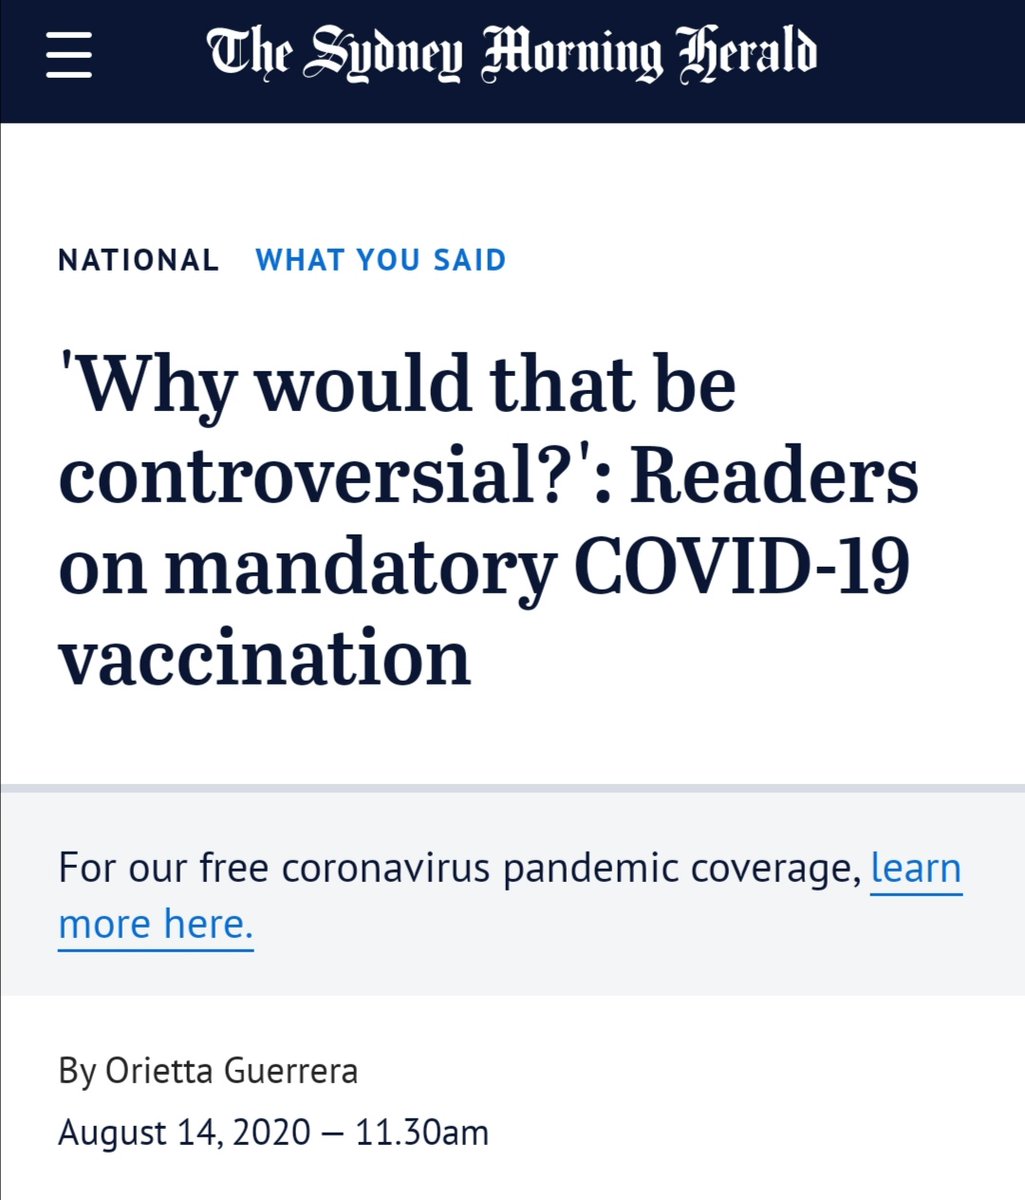 Readers respond to recent article advocating for mandatory Covid vaccinations in Australia:  https://www.smh.com.au/national/why-would-that-be-controversial-readers-on-mandatory-covid-19-vaccination-20200811-p55kn9.html